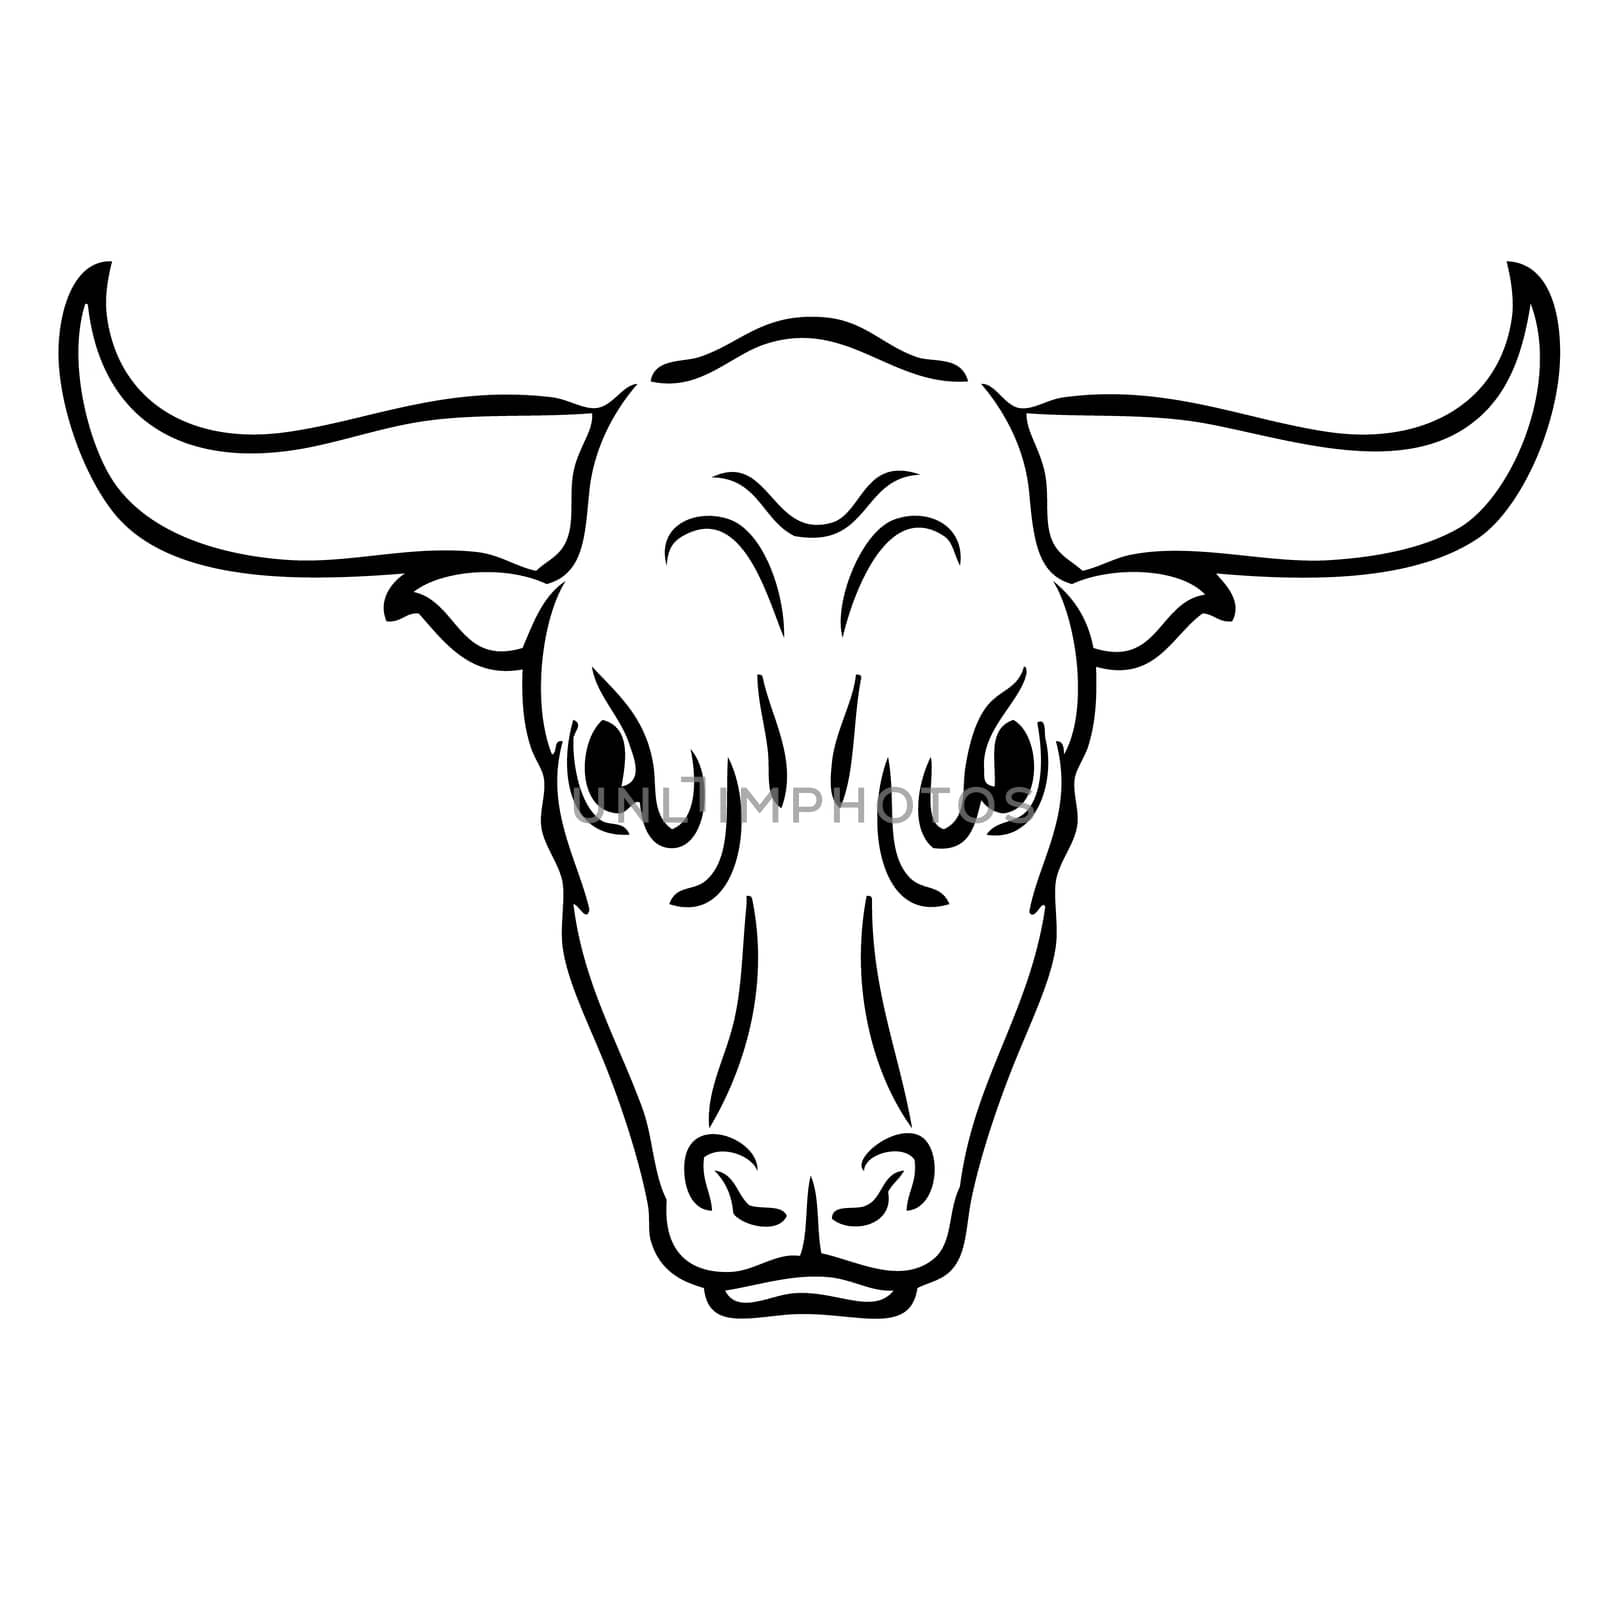 Freehand illustration of bull on white background, doodle hand drawn